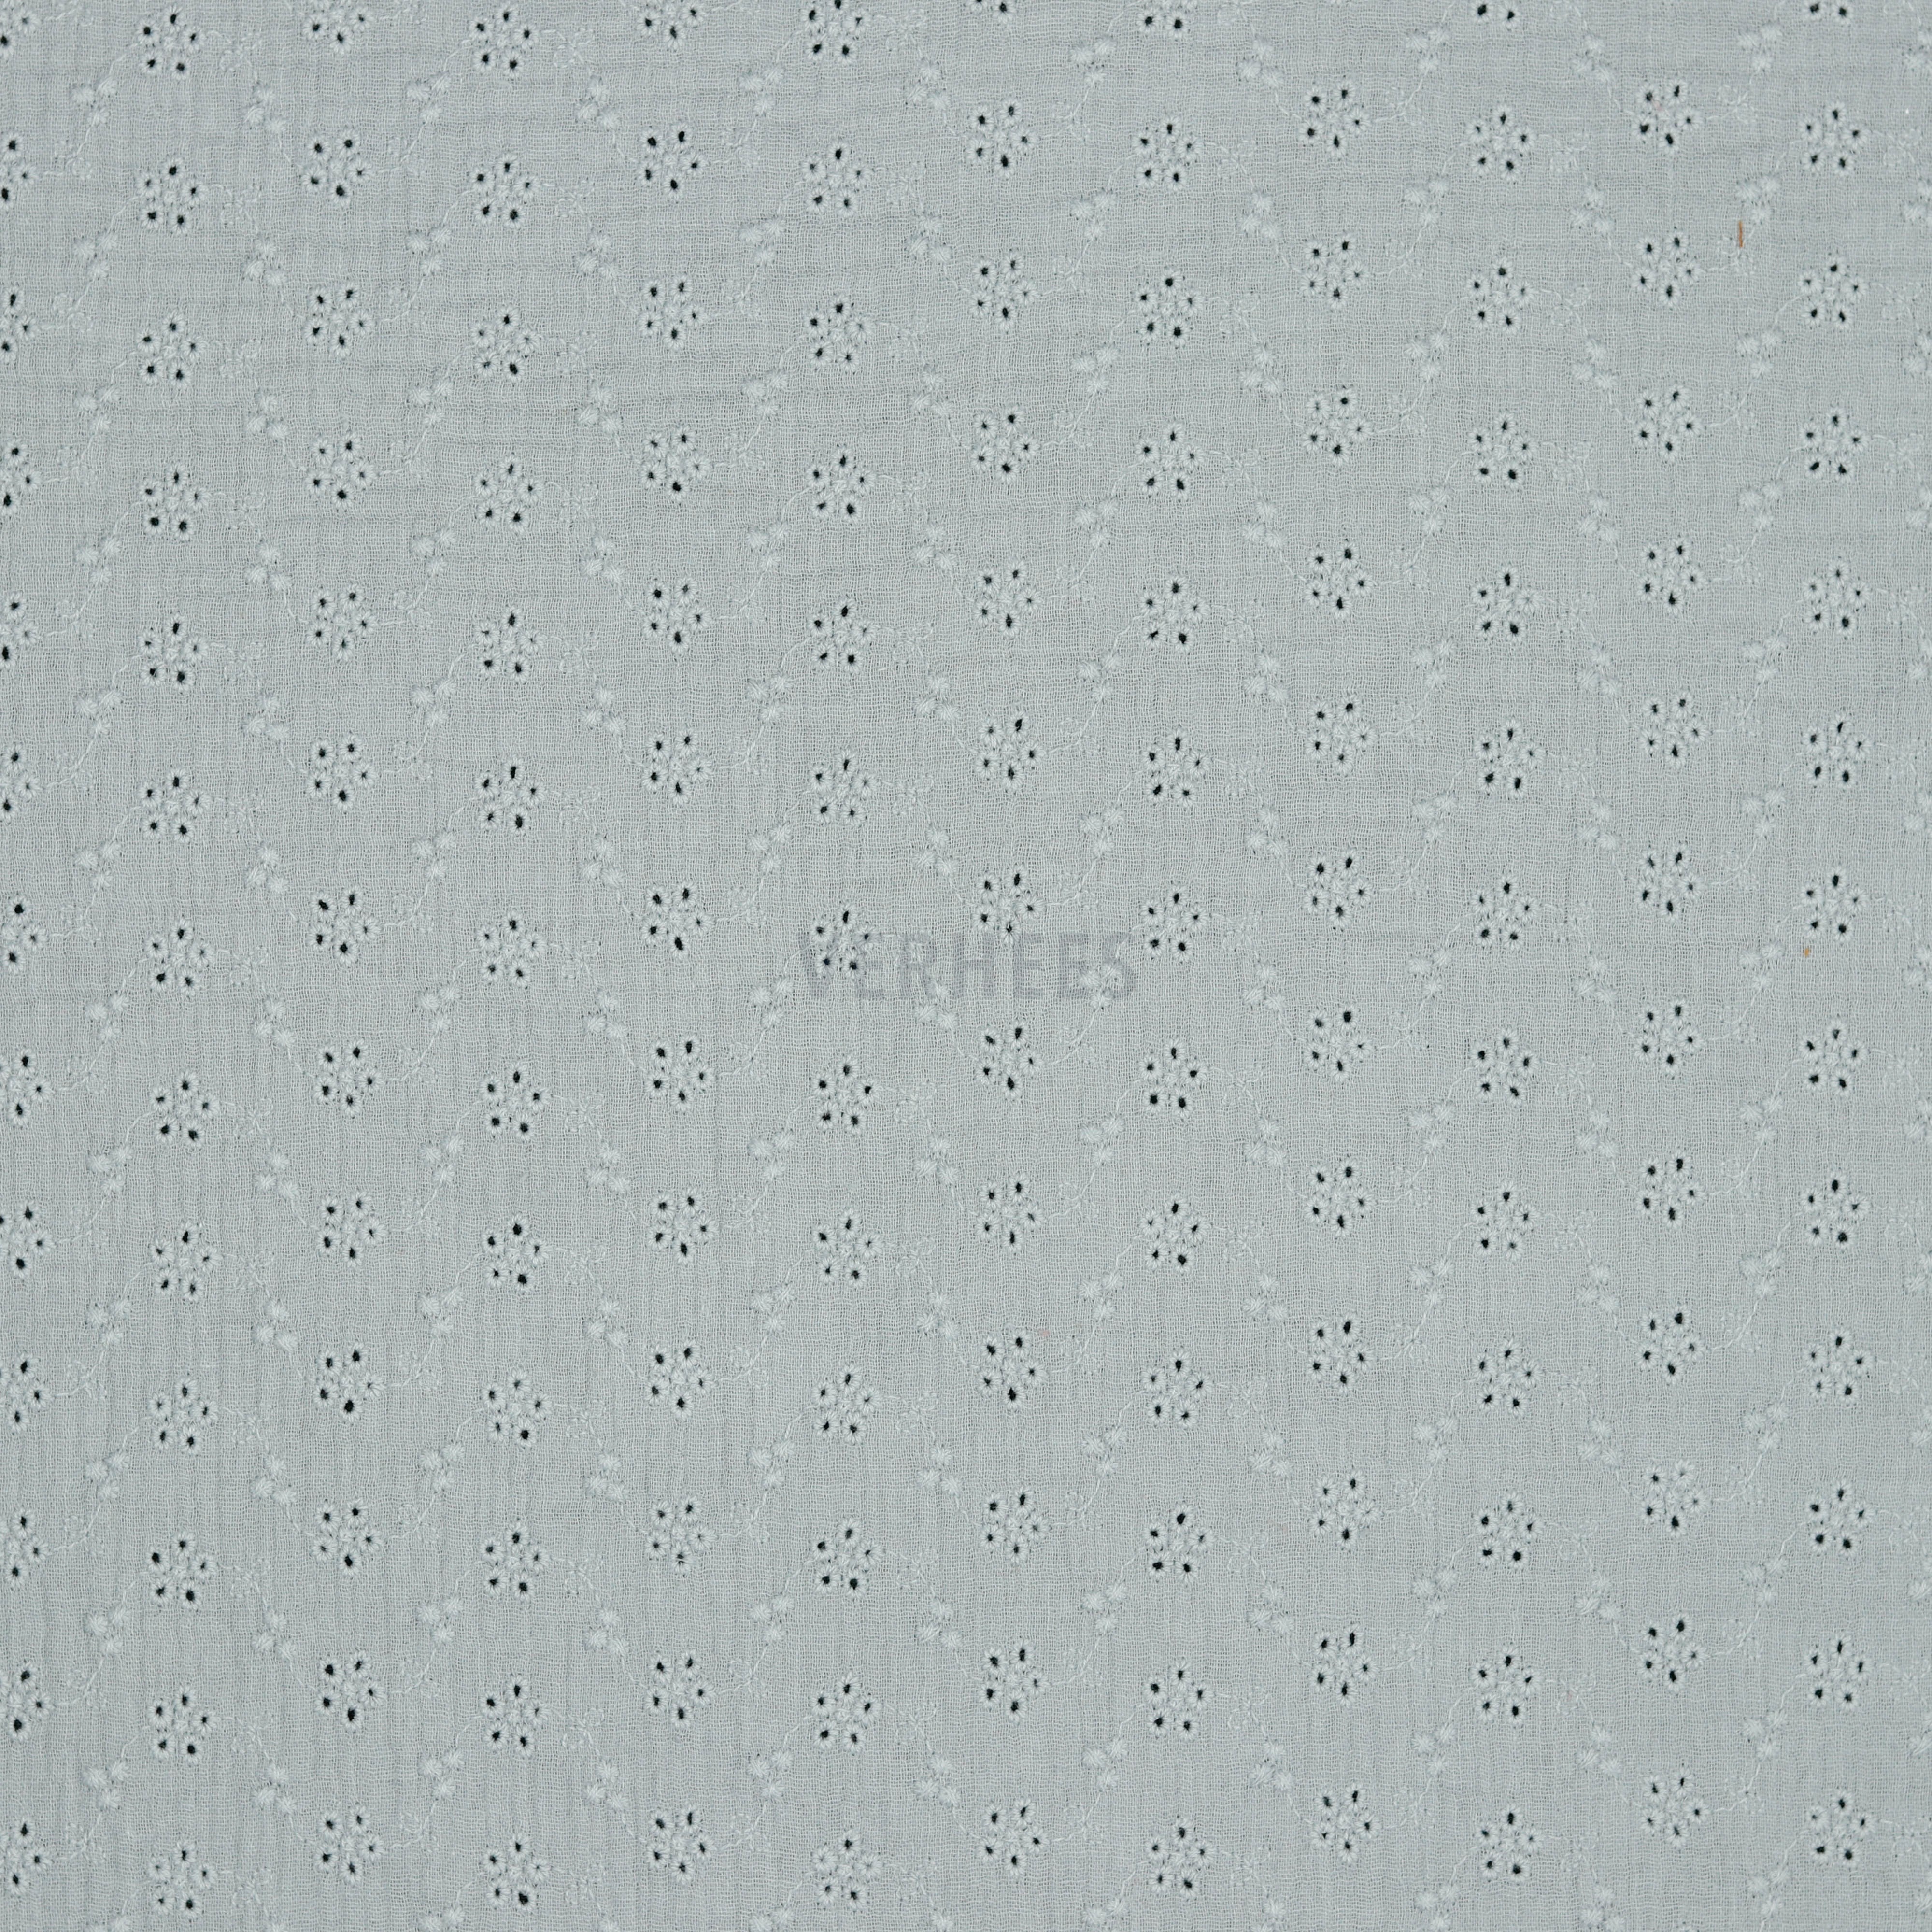 DOUBLE GAUZE EMBROIDERY FLOWERS GREY (high resolution)